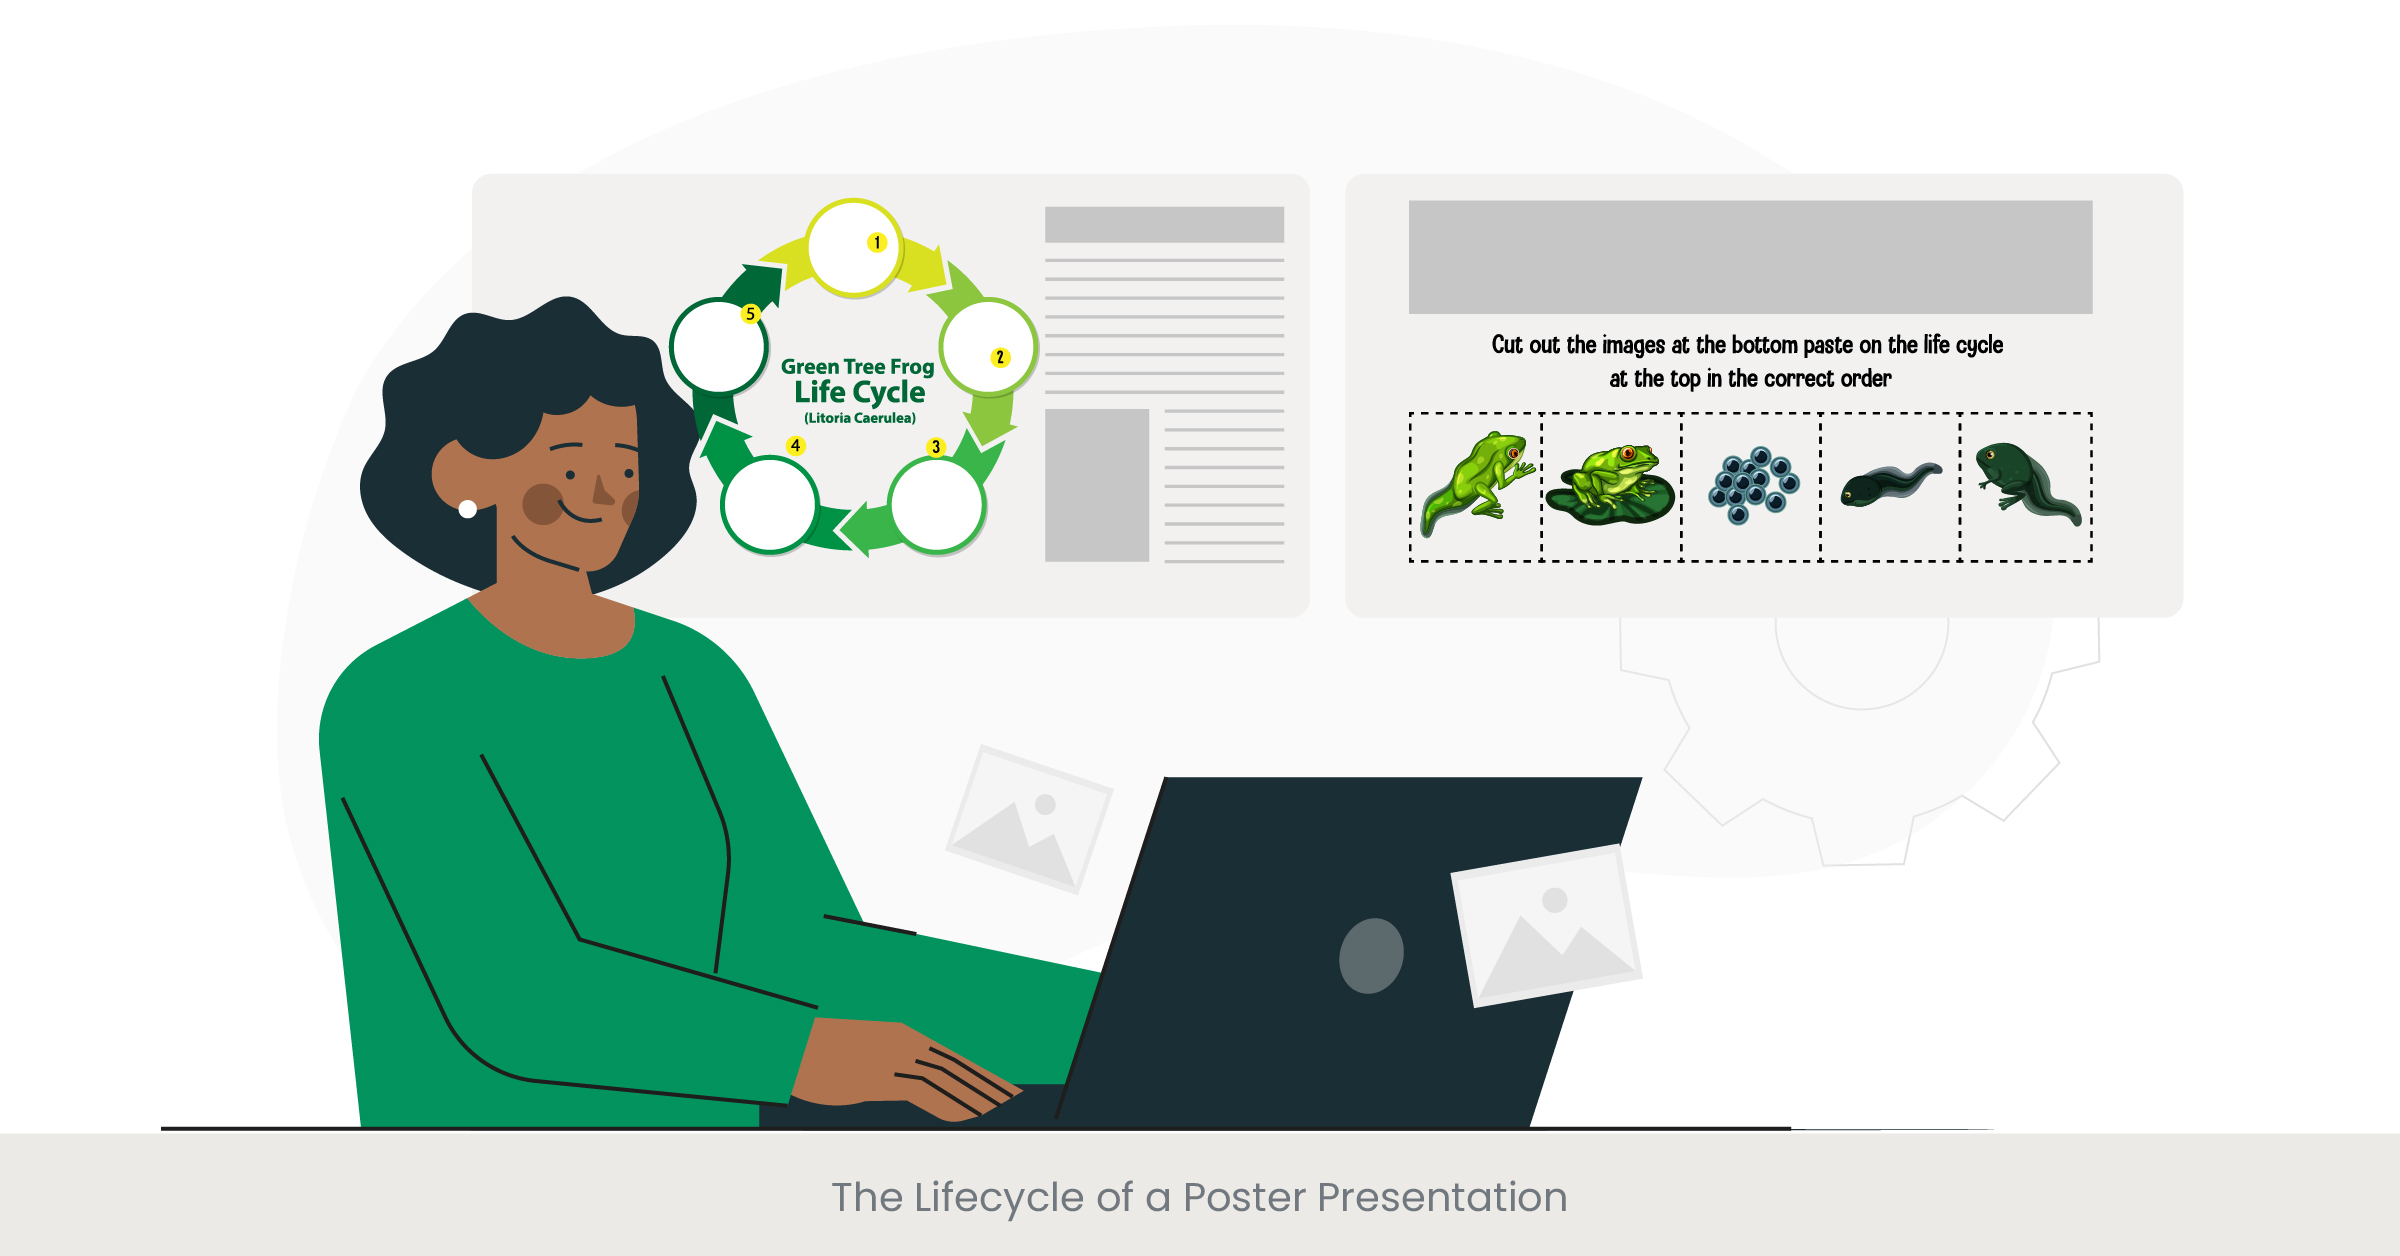 The Lifecycle of a Poster Presentation